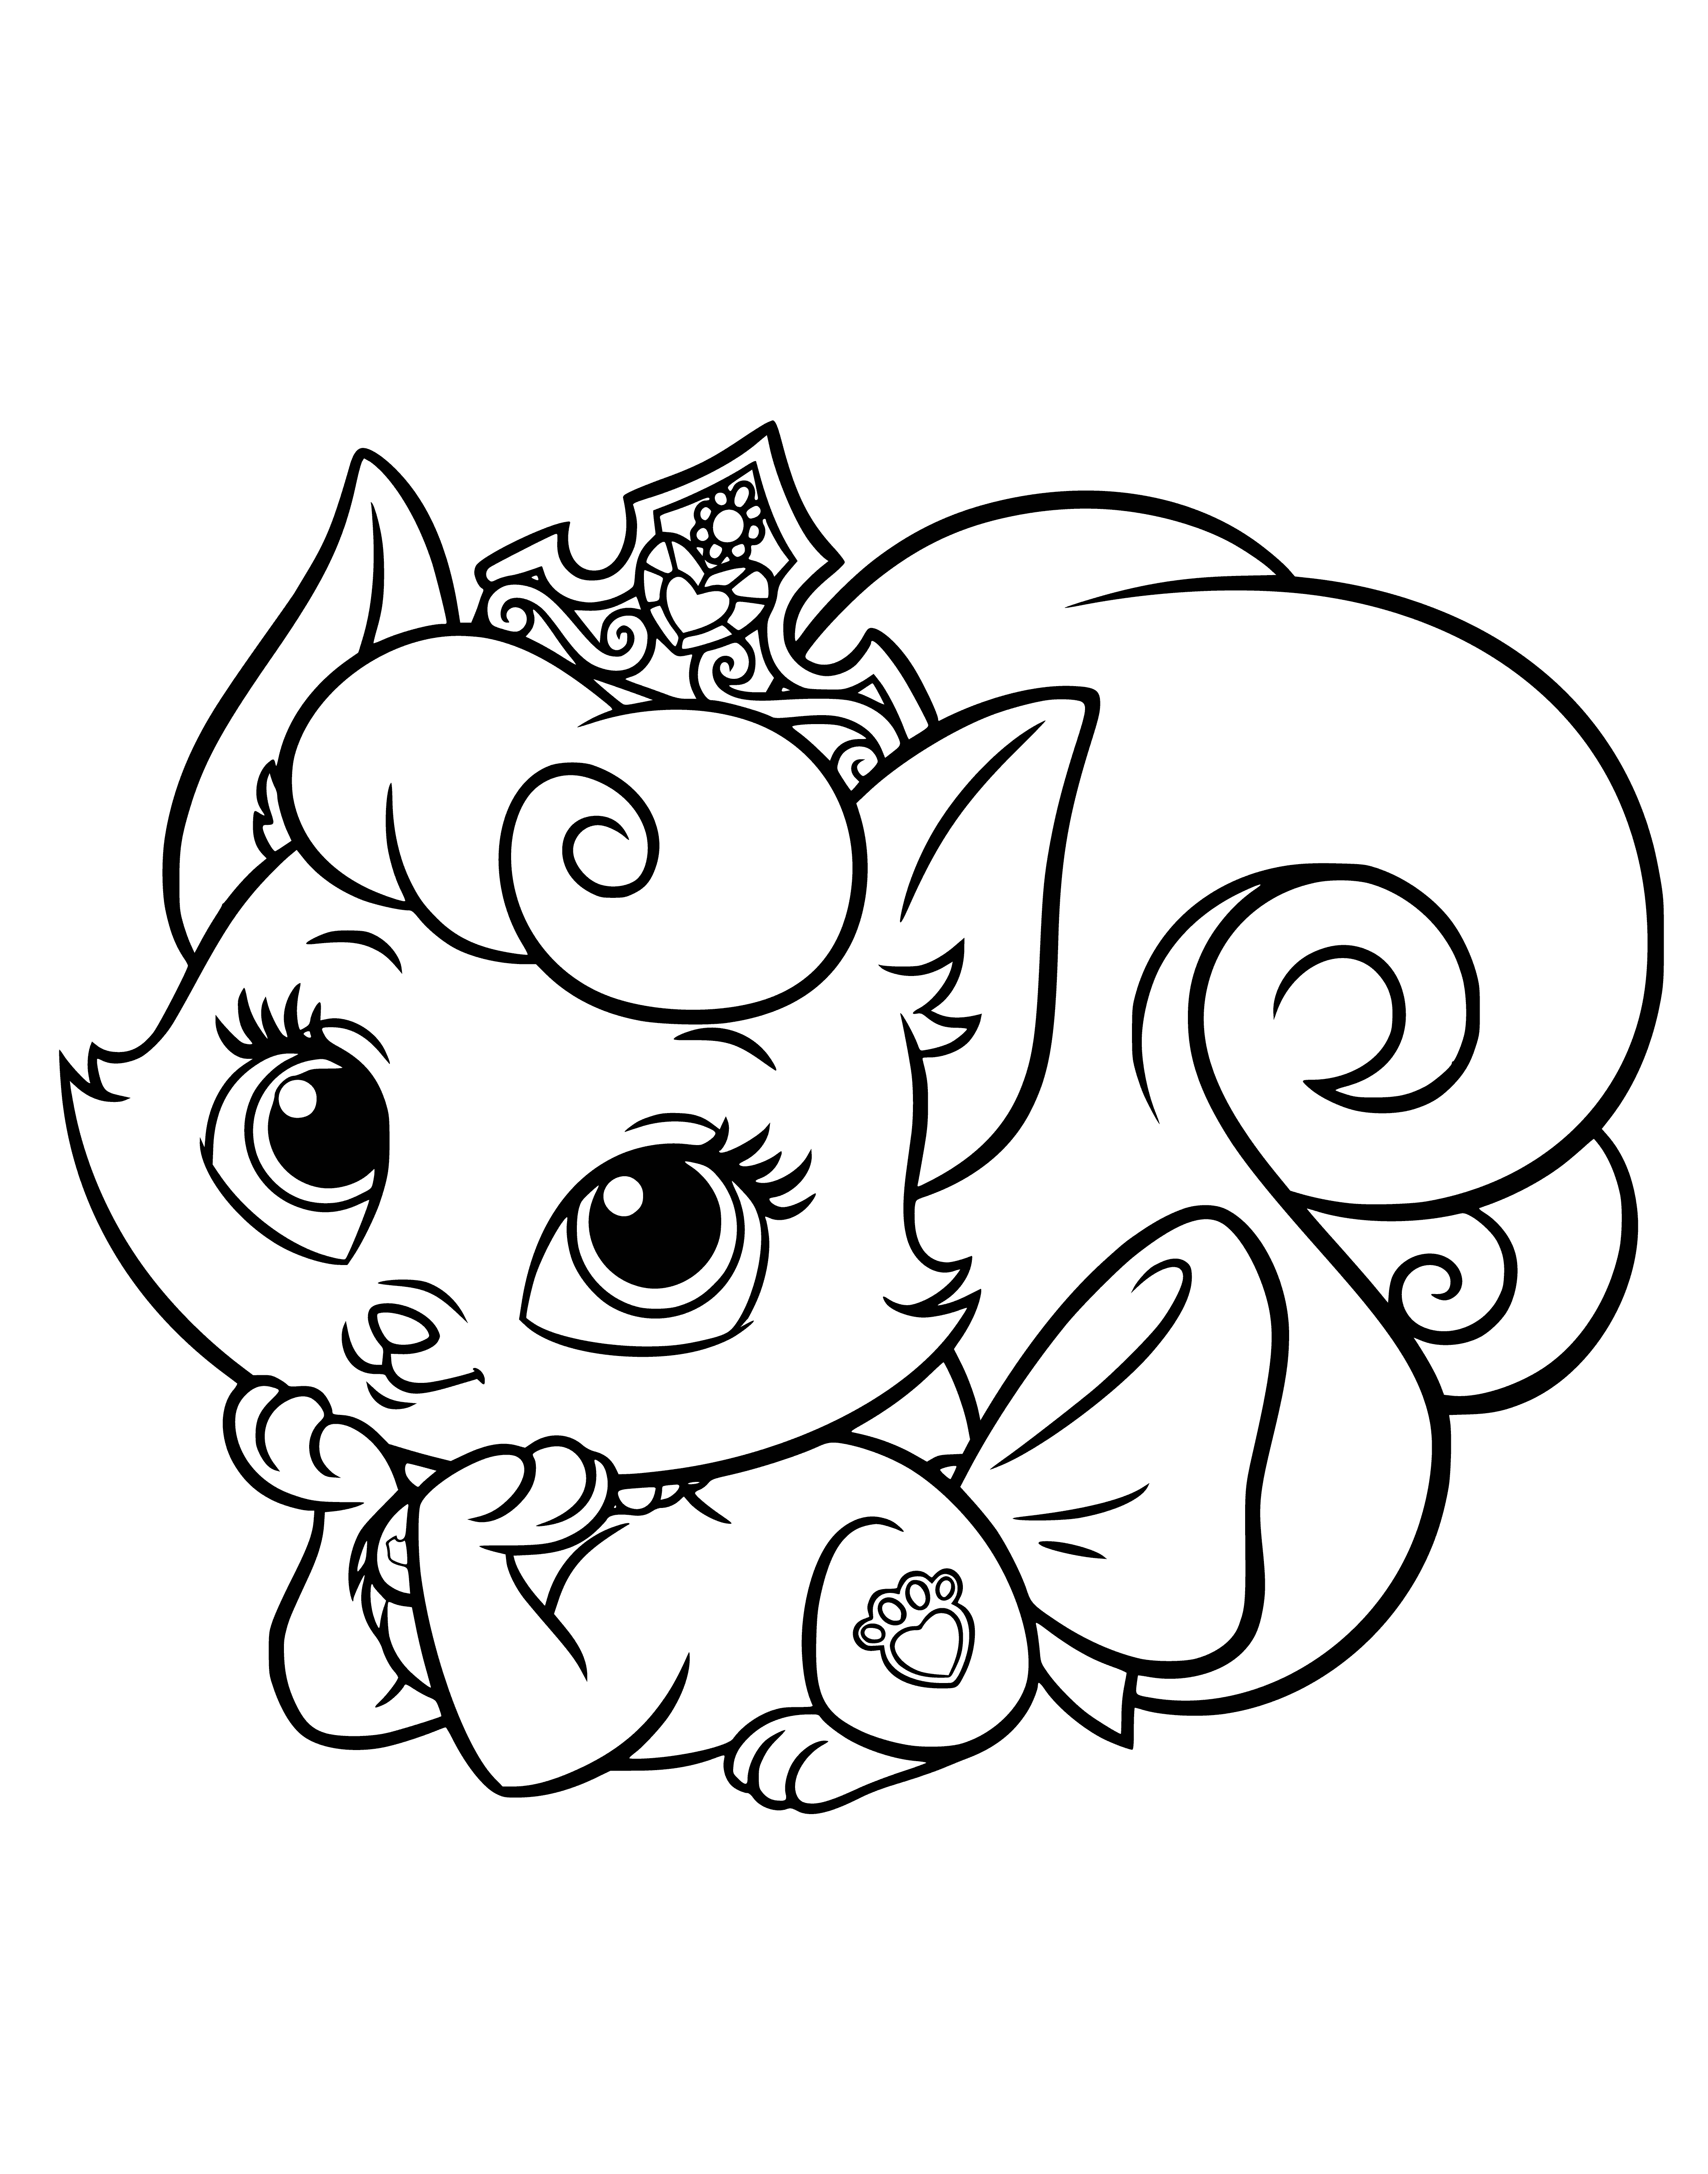 coloring page: Princess Aurora's pet Kitten Cutie is a cute light brown kitten with blue eyes and white paws, happily lounging in a wicker basket with a pink bow.